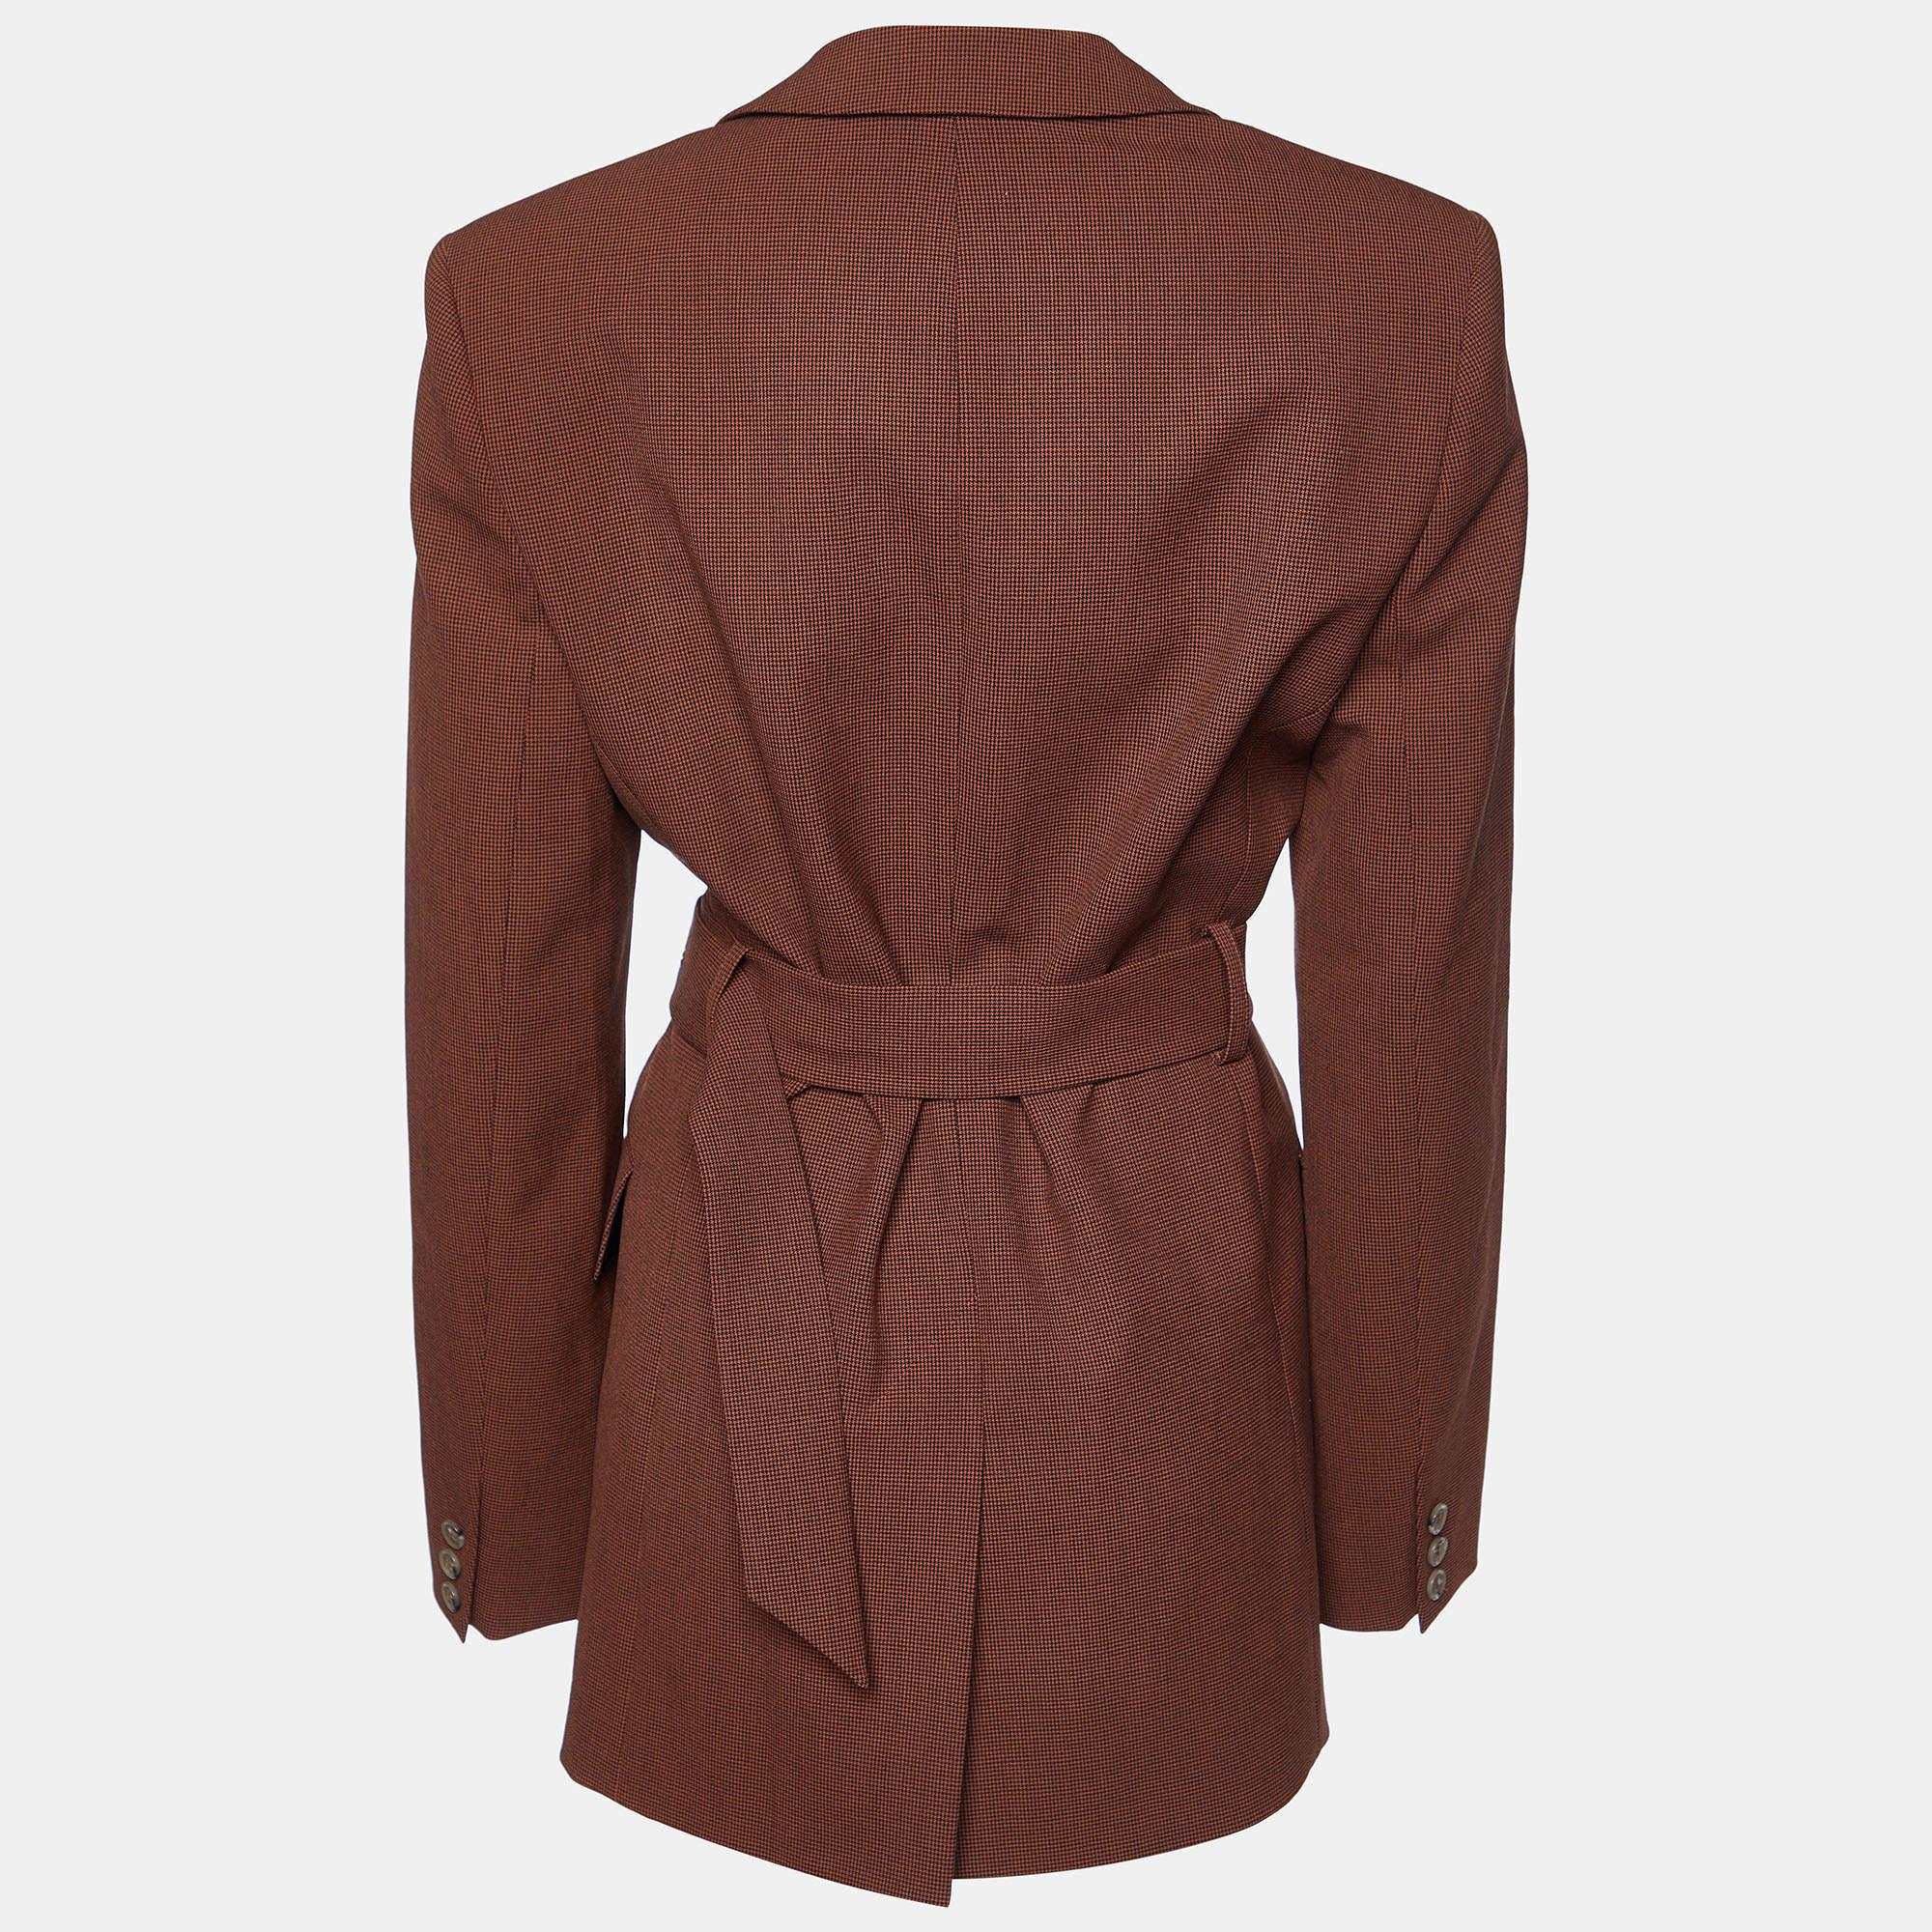 Wrap yourself in timeless elegance with the Nanushka blazer. Crafted with exquisite attention to detail, this blazer features a classic brown houndstooth pattern, a flattering belted waist, and a sophisticated silhouette that effortlessly exudes